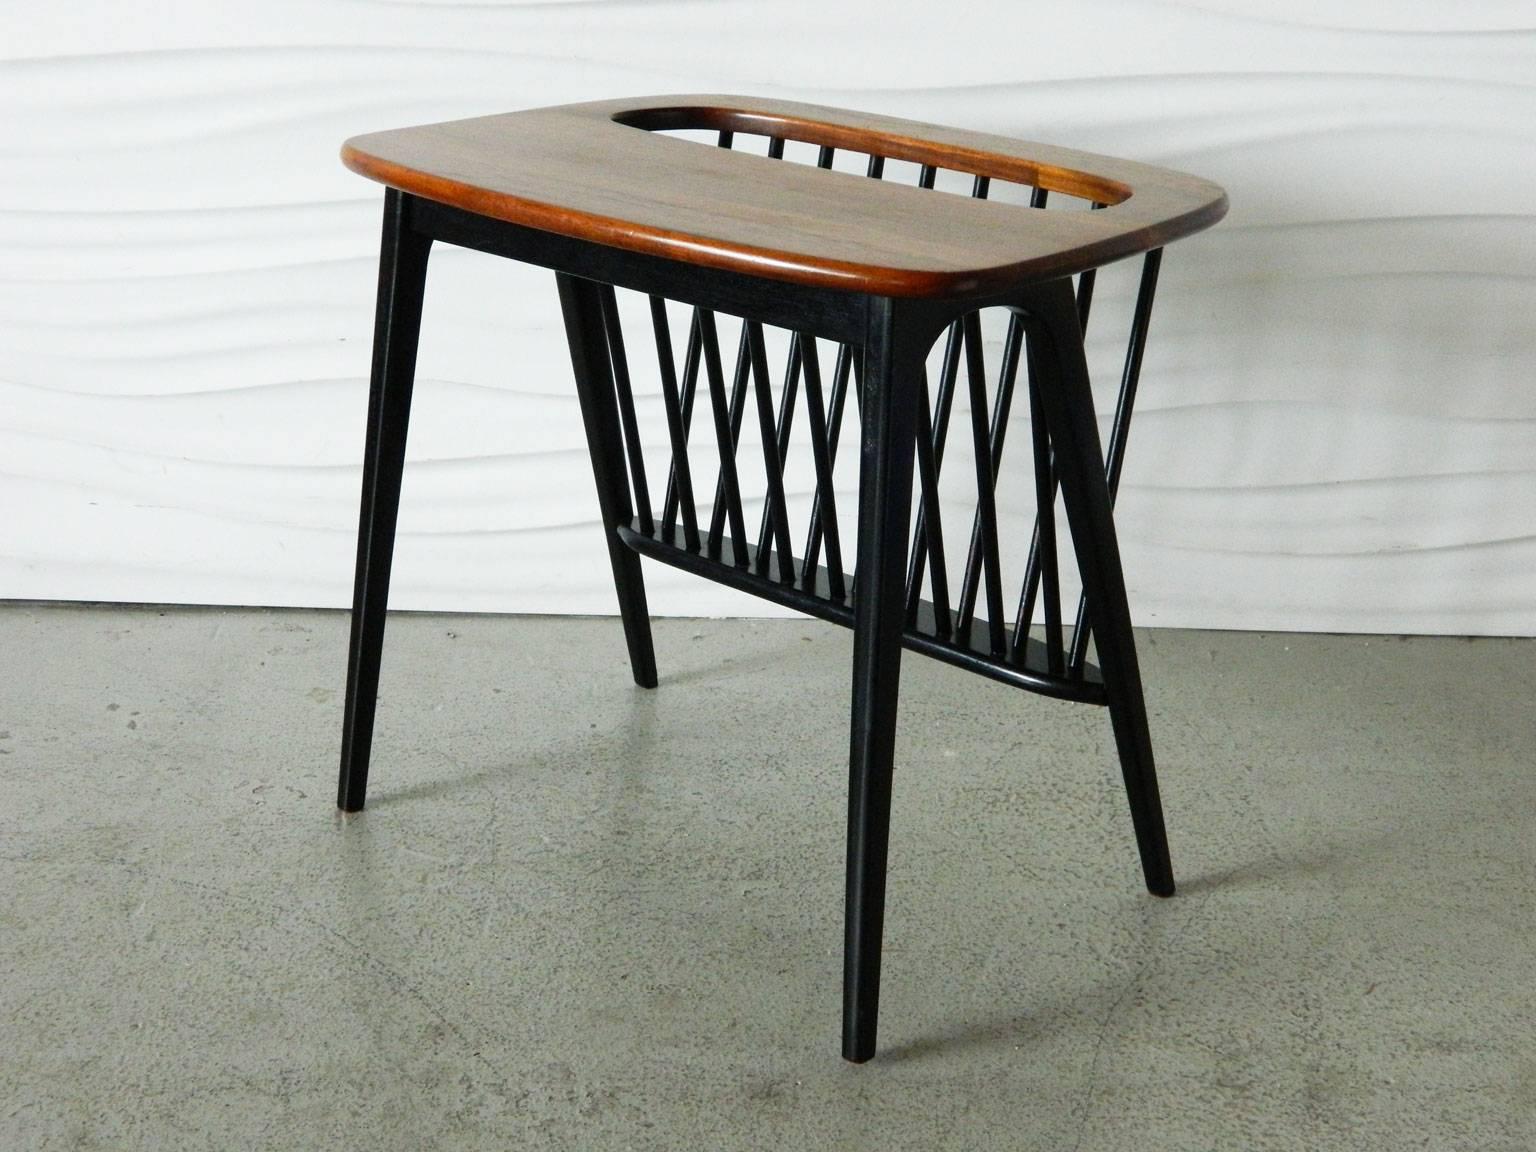 The gorgeous grain of the walnut top contrasts beautifully with the black painted base of this iconic Arthur Umanoff magazine stand or side table.